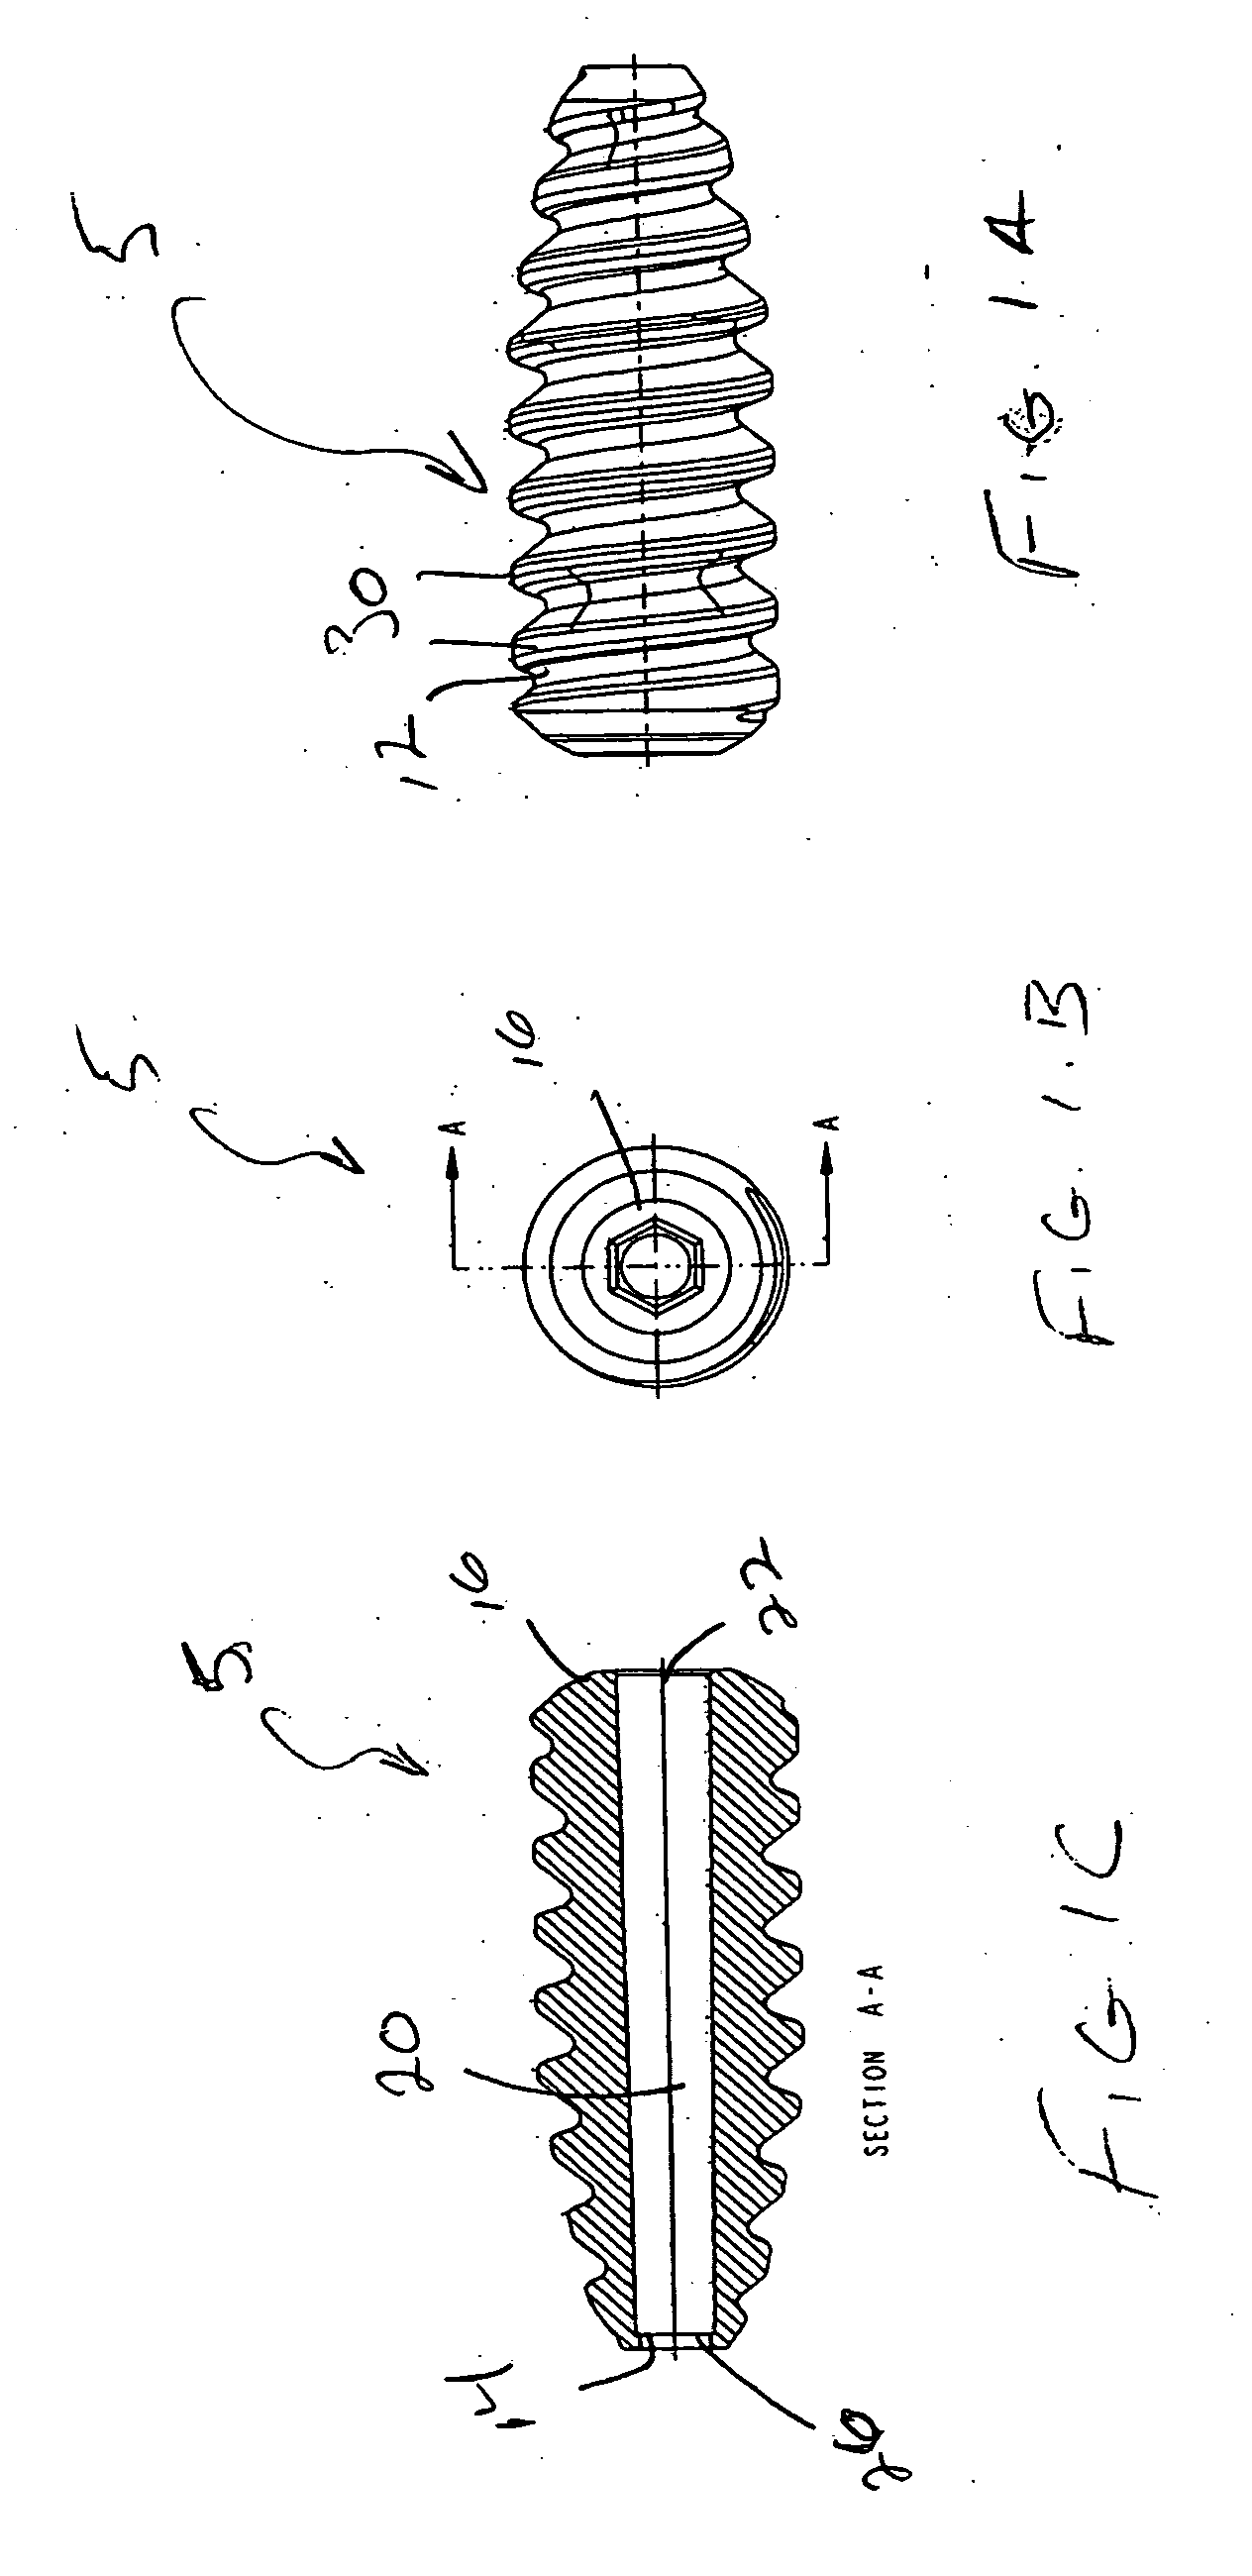 Method of performing anterior cruciate ligament reconstruction using biodegradable interference screw